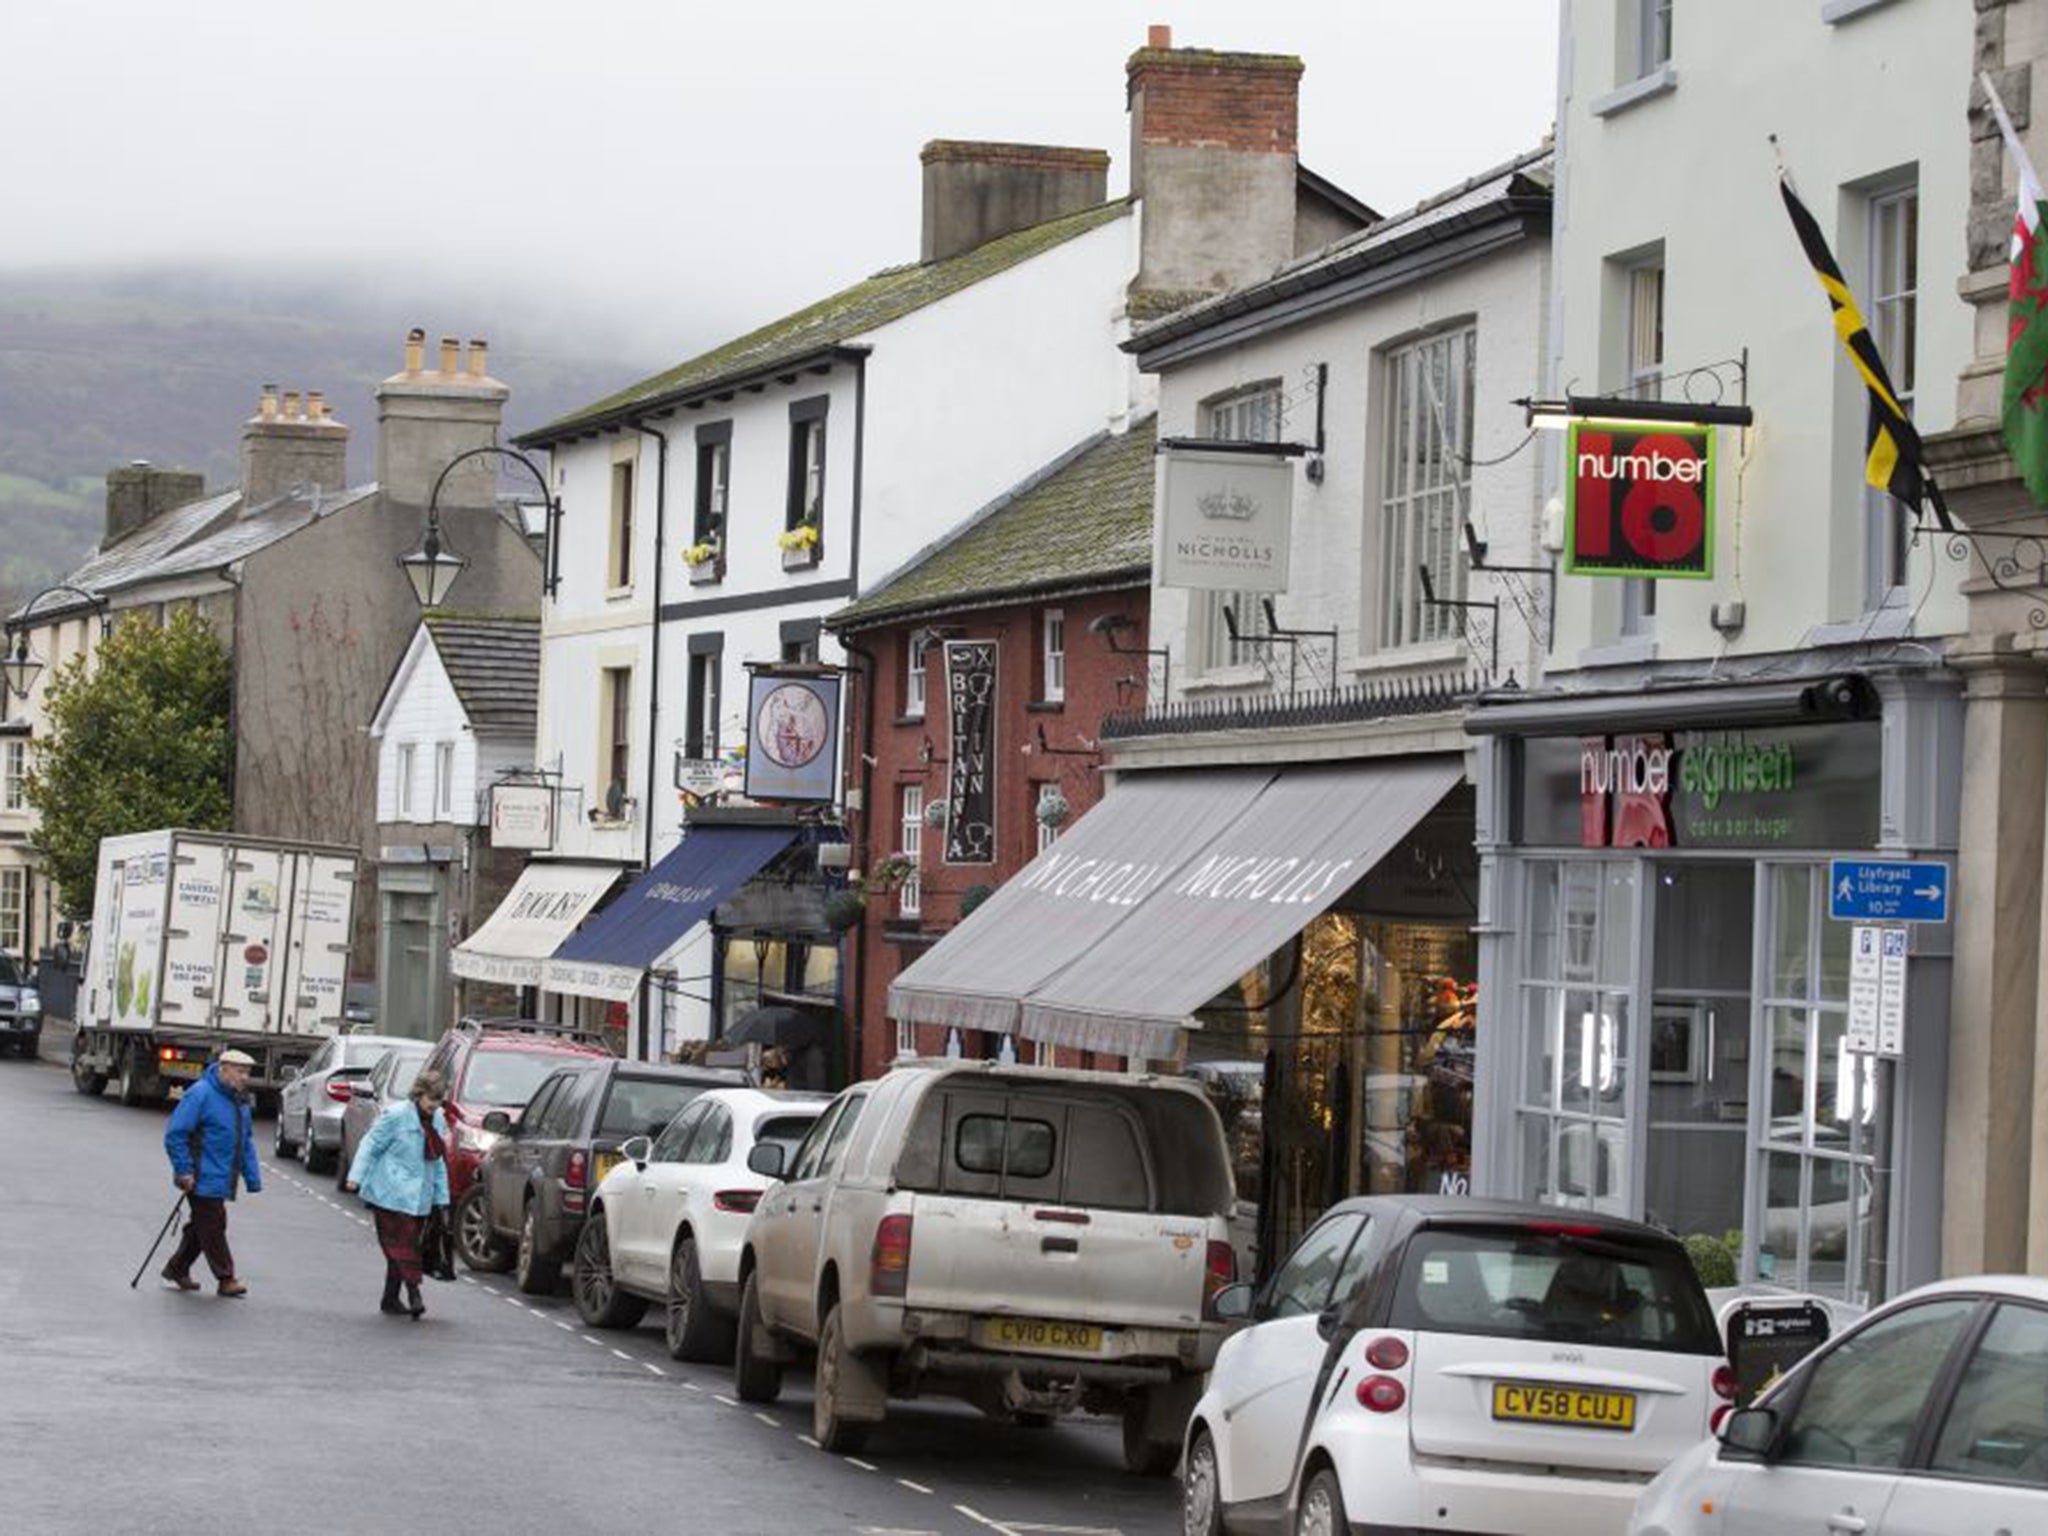 The residents of Crickhowell have a history of standing up to big retailers. Boots the chemist is the only national chain in the town's main shopping street